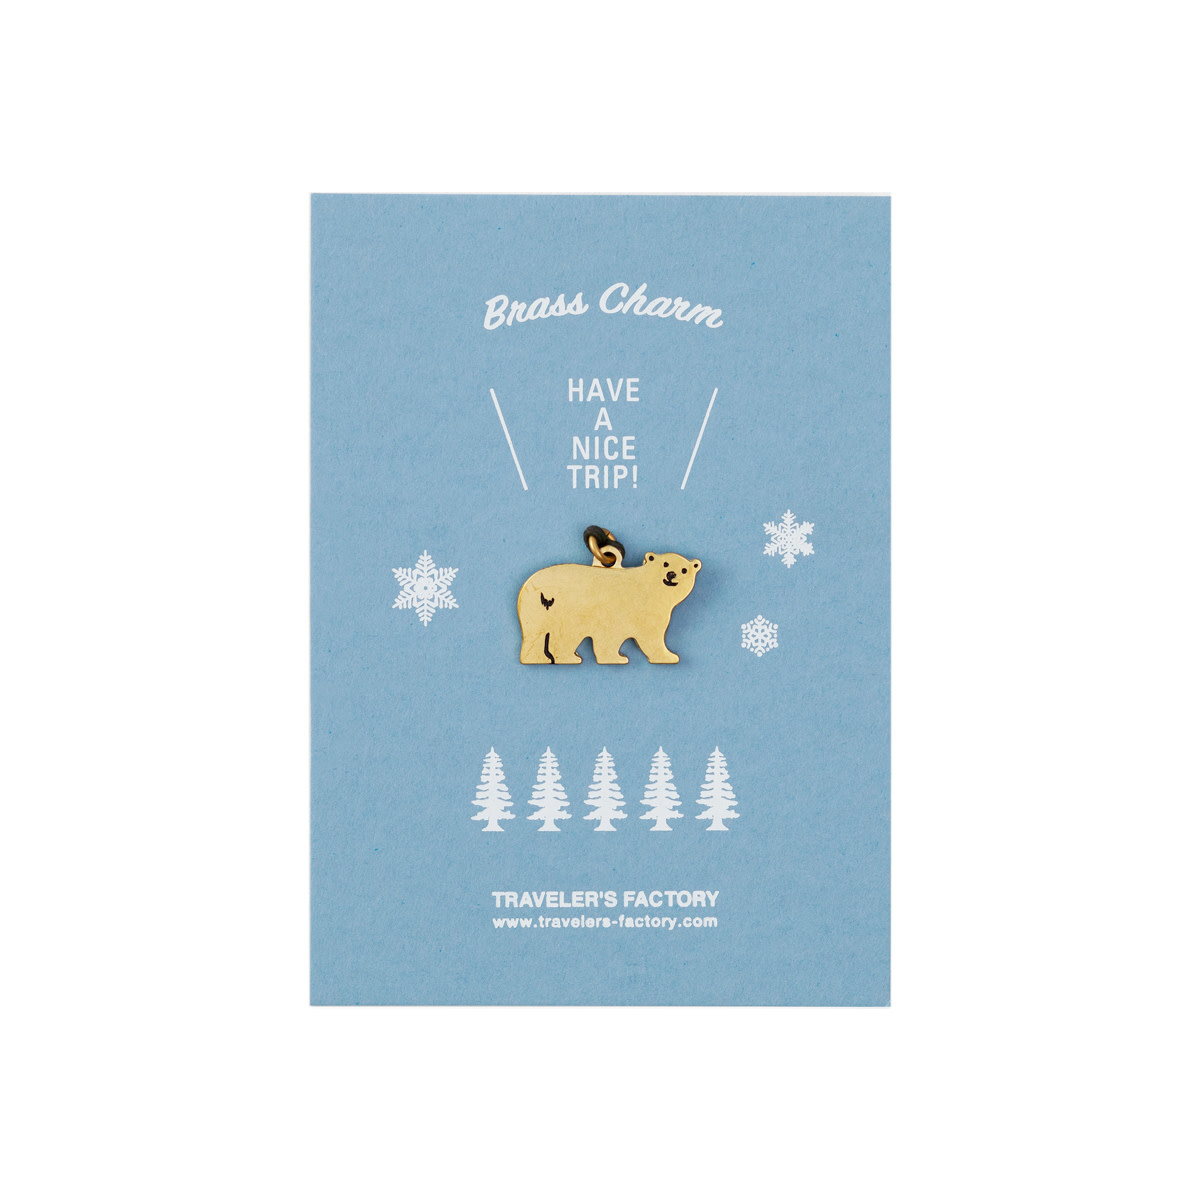 White Polar Bear on Blue All Occasion Wrapping Paper